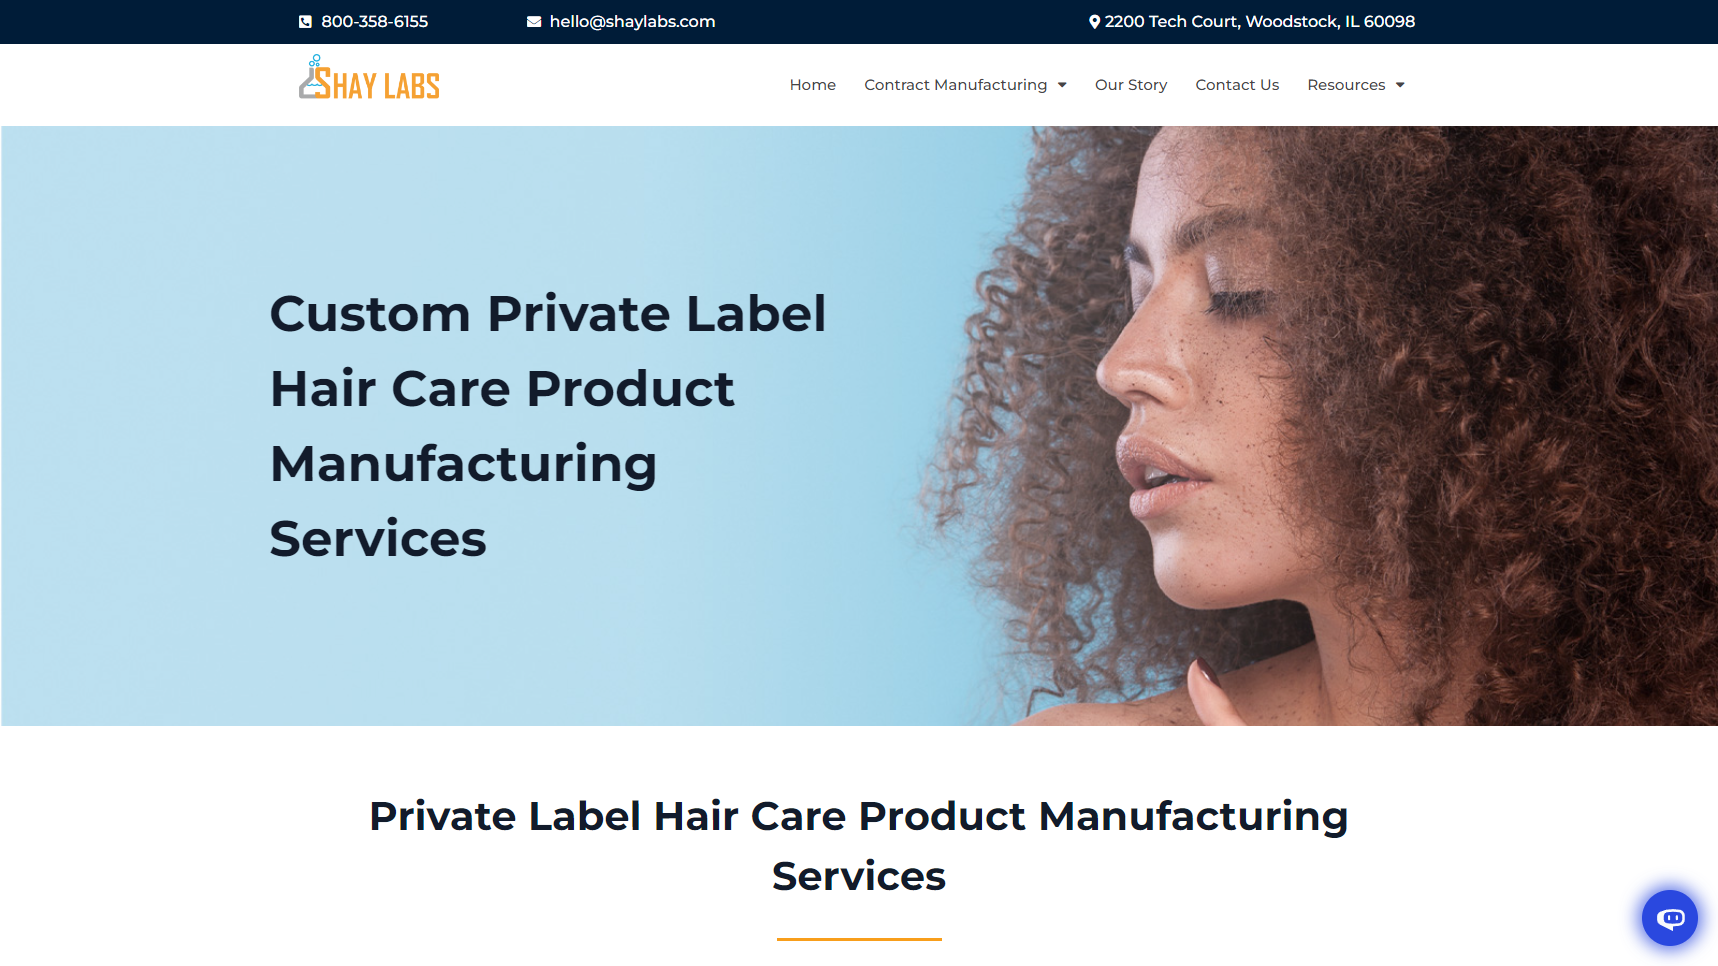 Shay Labs - Hair Care Manufacturer